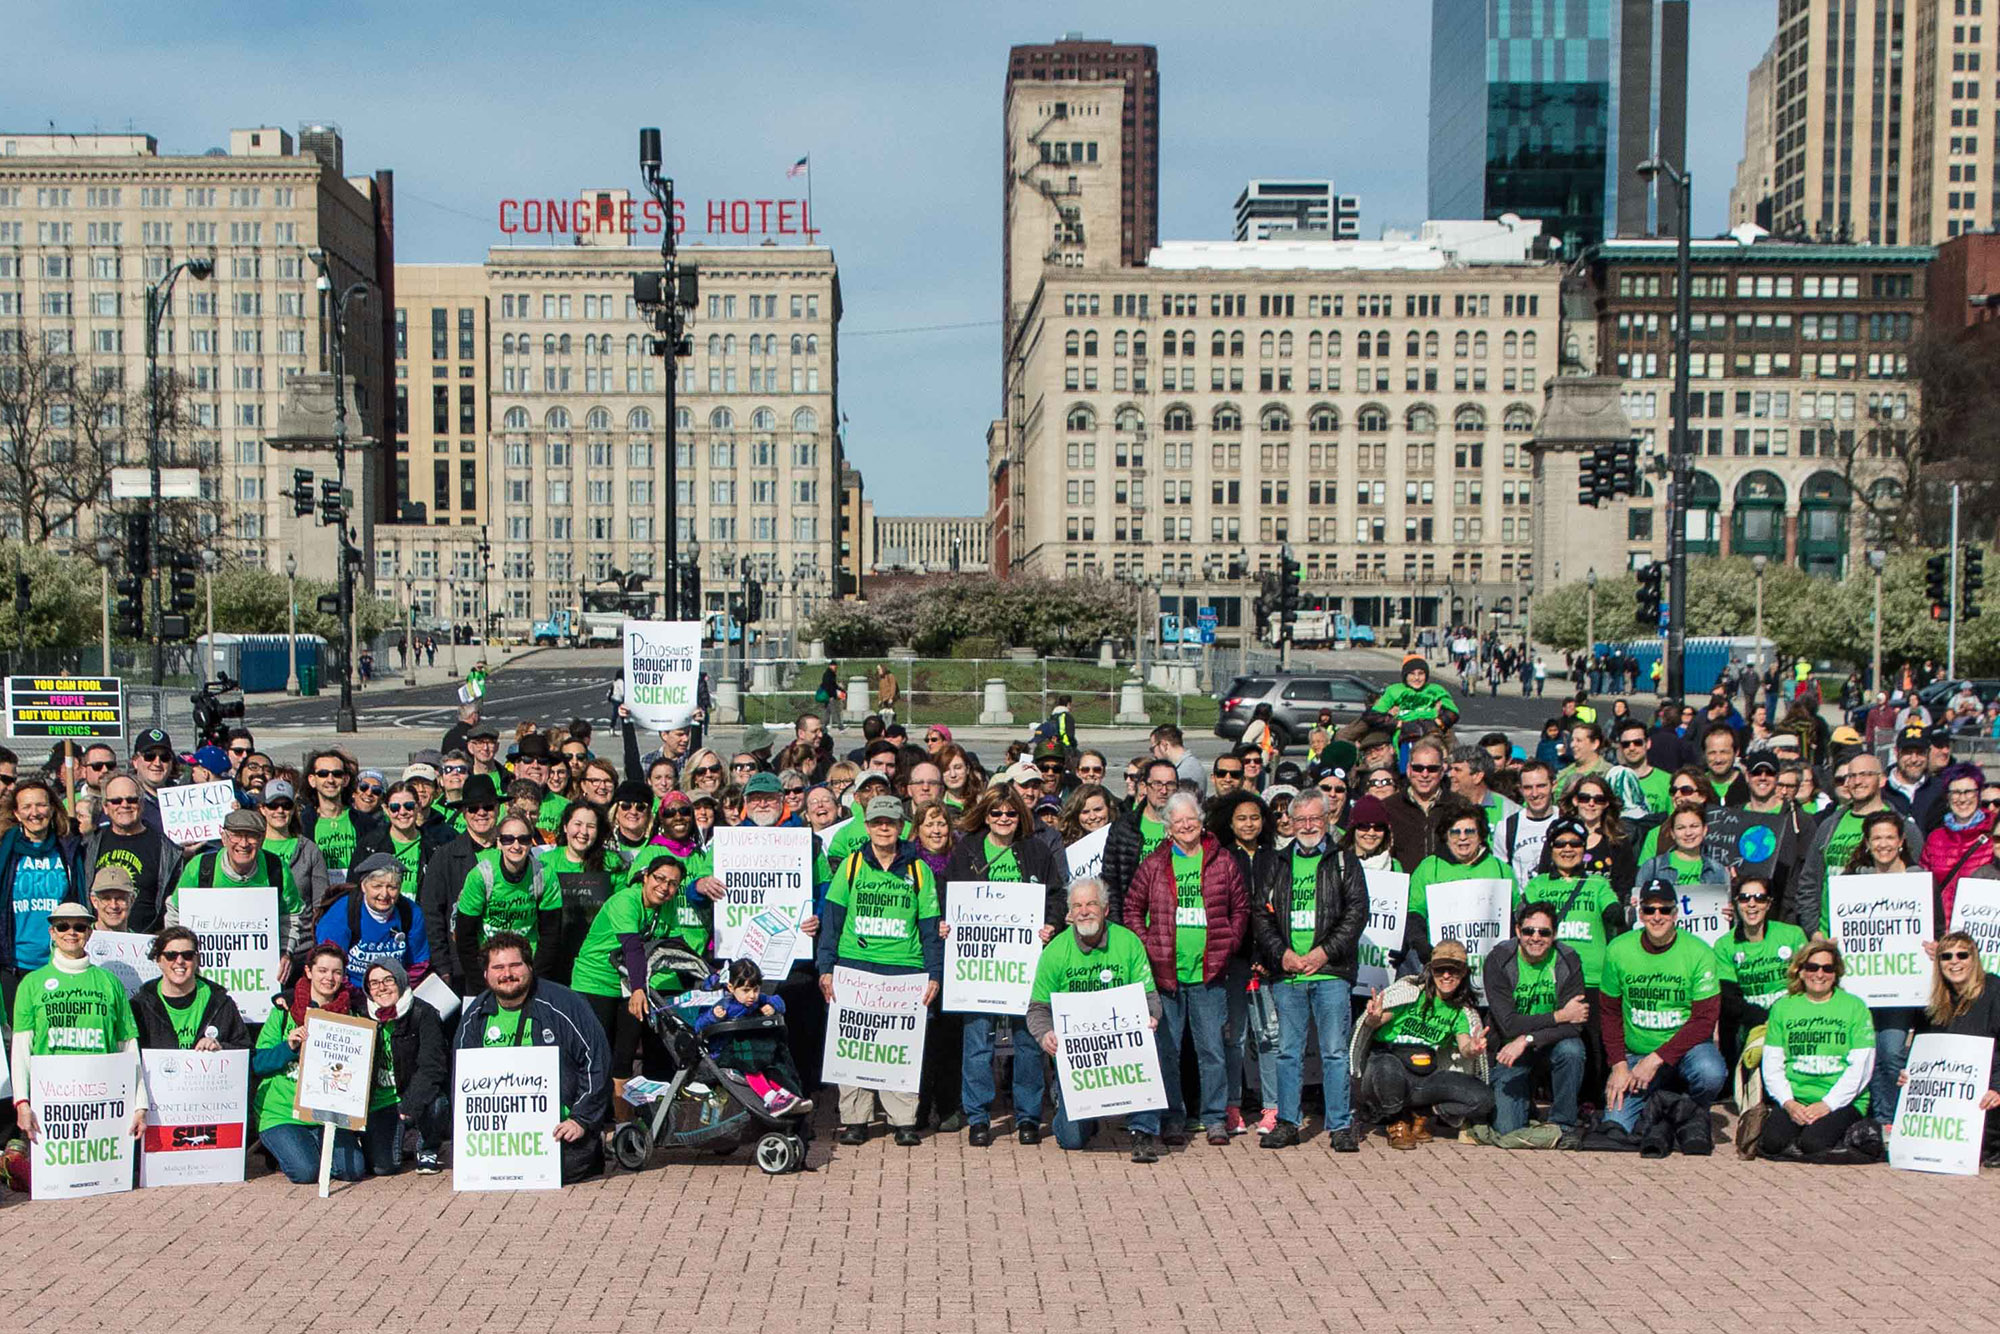 A large group of museum staff holding signs pose in Grant Park before the 2017 March for Science.